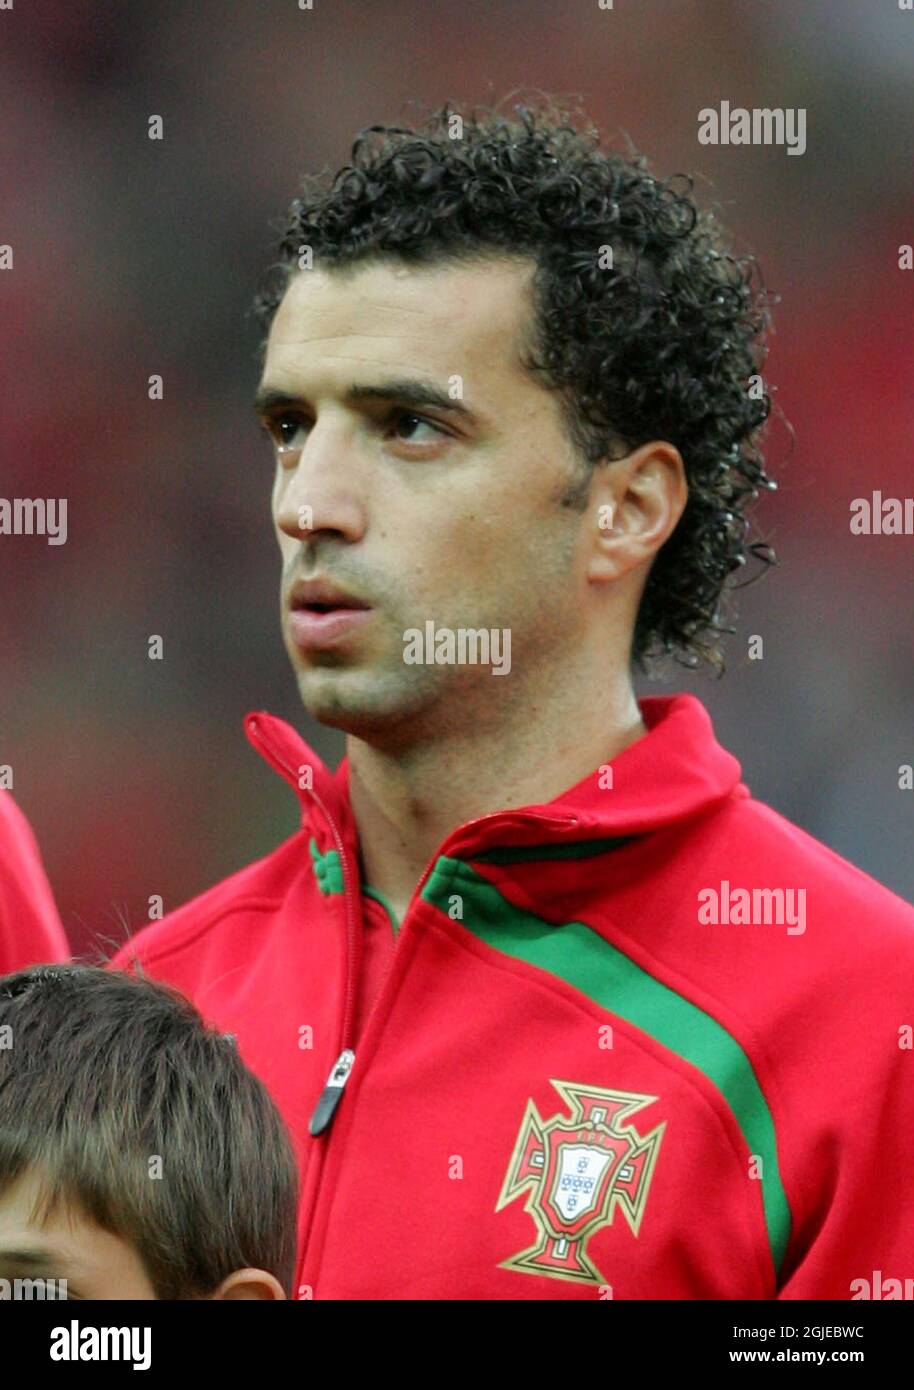 Portugal's Simao during the group A match between Portugal and Turkey in Geneva, Switzerland at the Euro 2008 European Soccer Championships Stock Photo